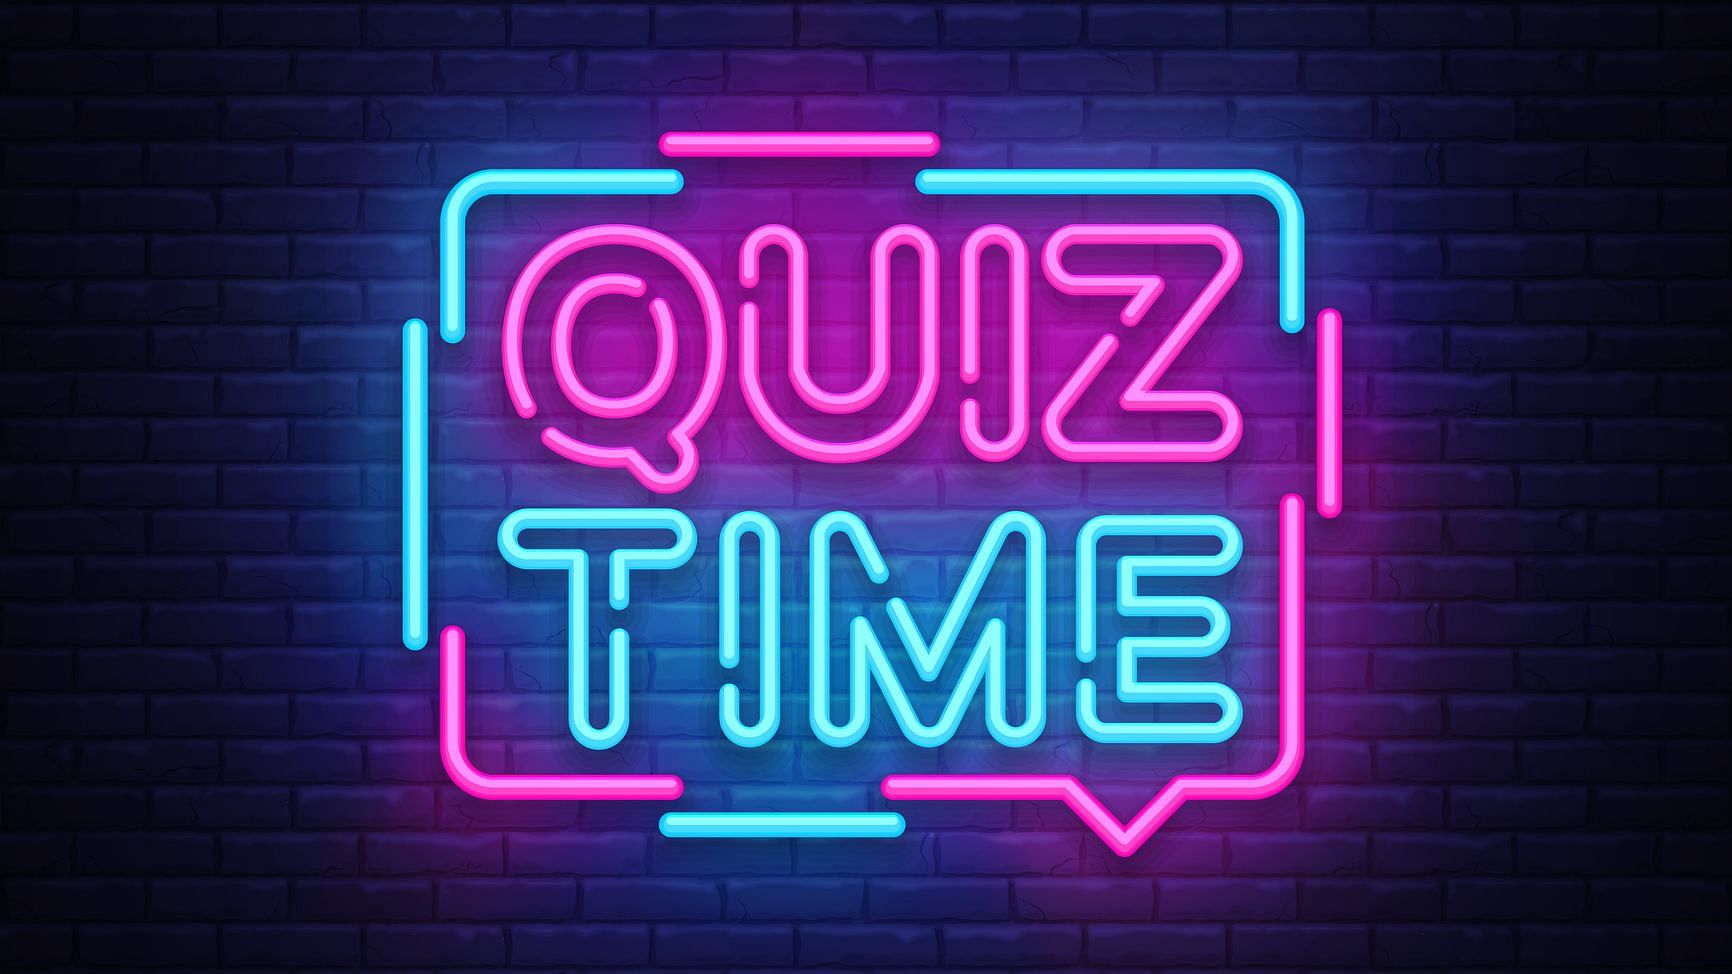 Amazon Quiz Questions and Answers Today, 25  February 2020